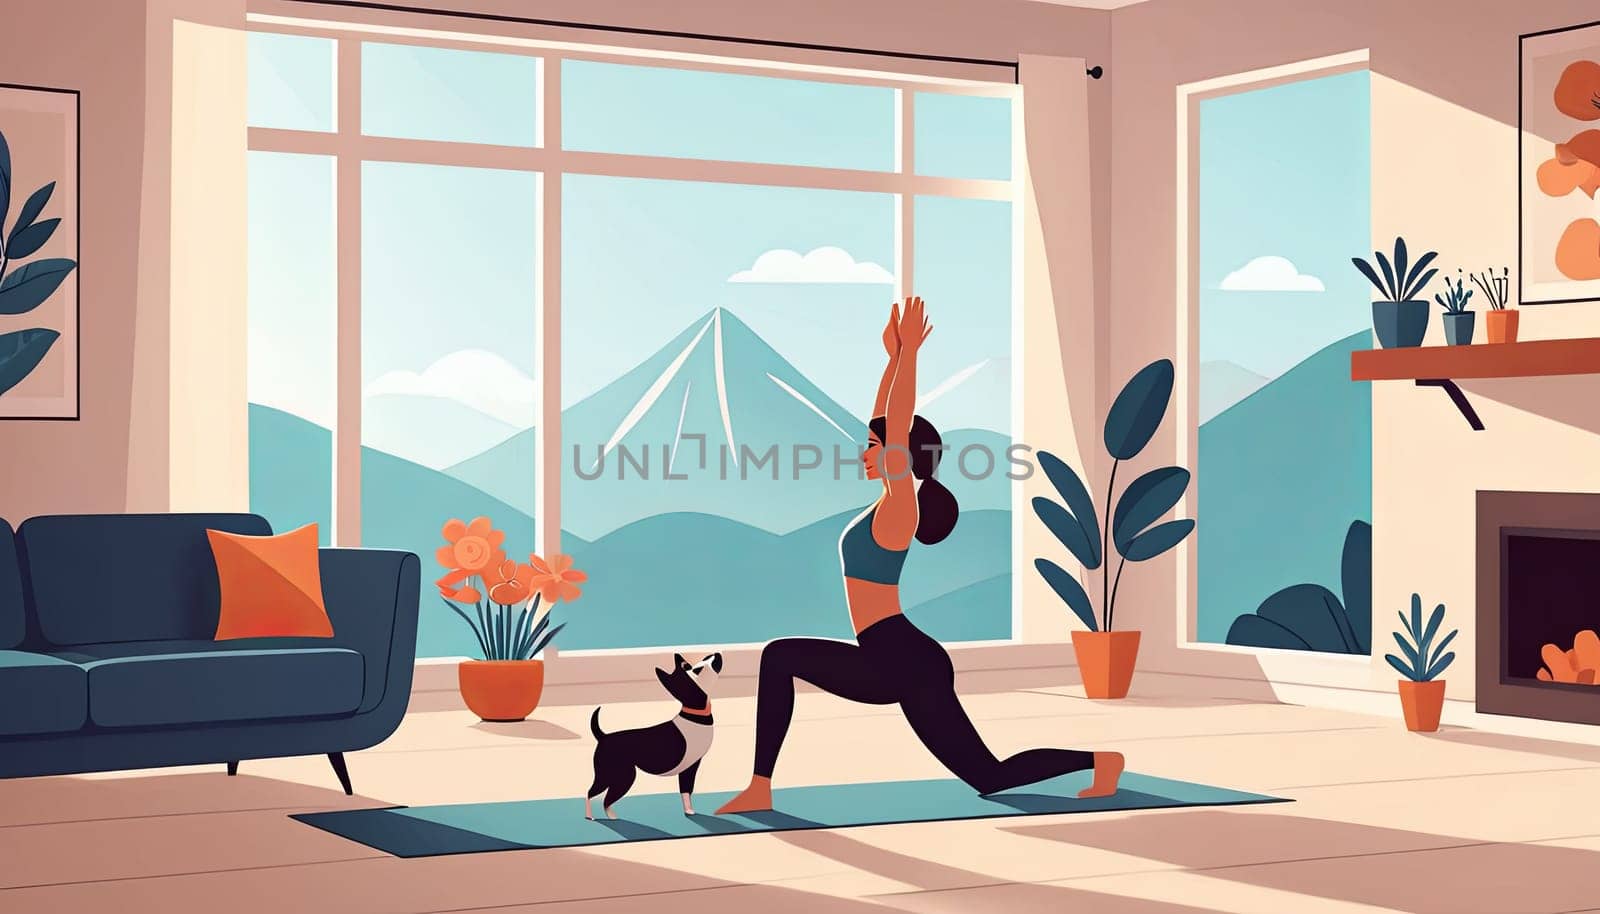 Woman practices yoga, dog nearby, home setting. Cartoon style, lifestyle depiction, interior scene. Meditation and sport emphasized